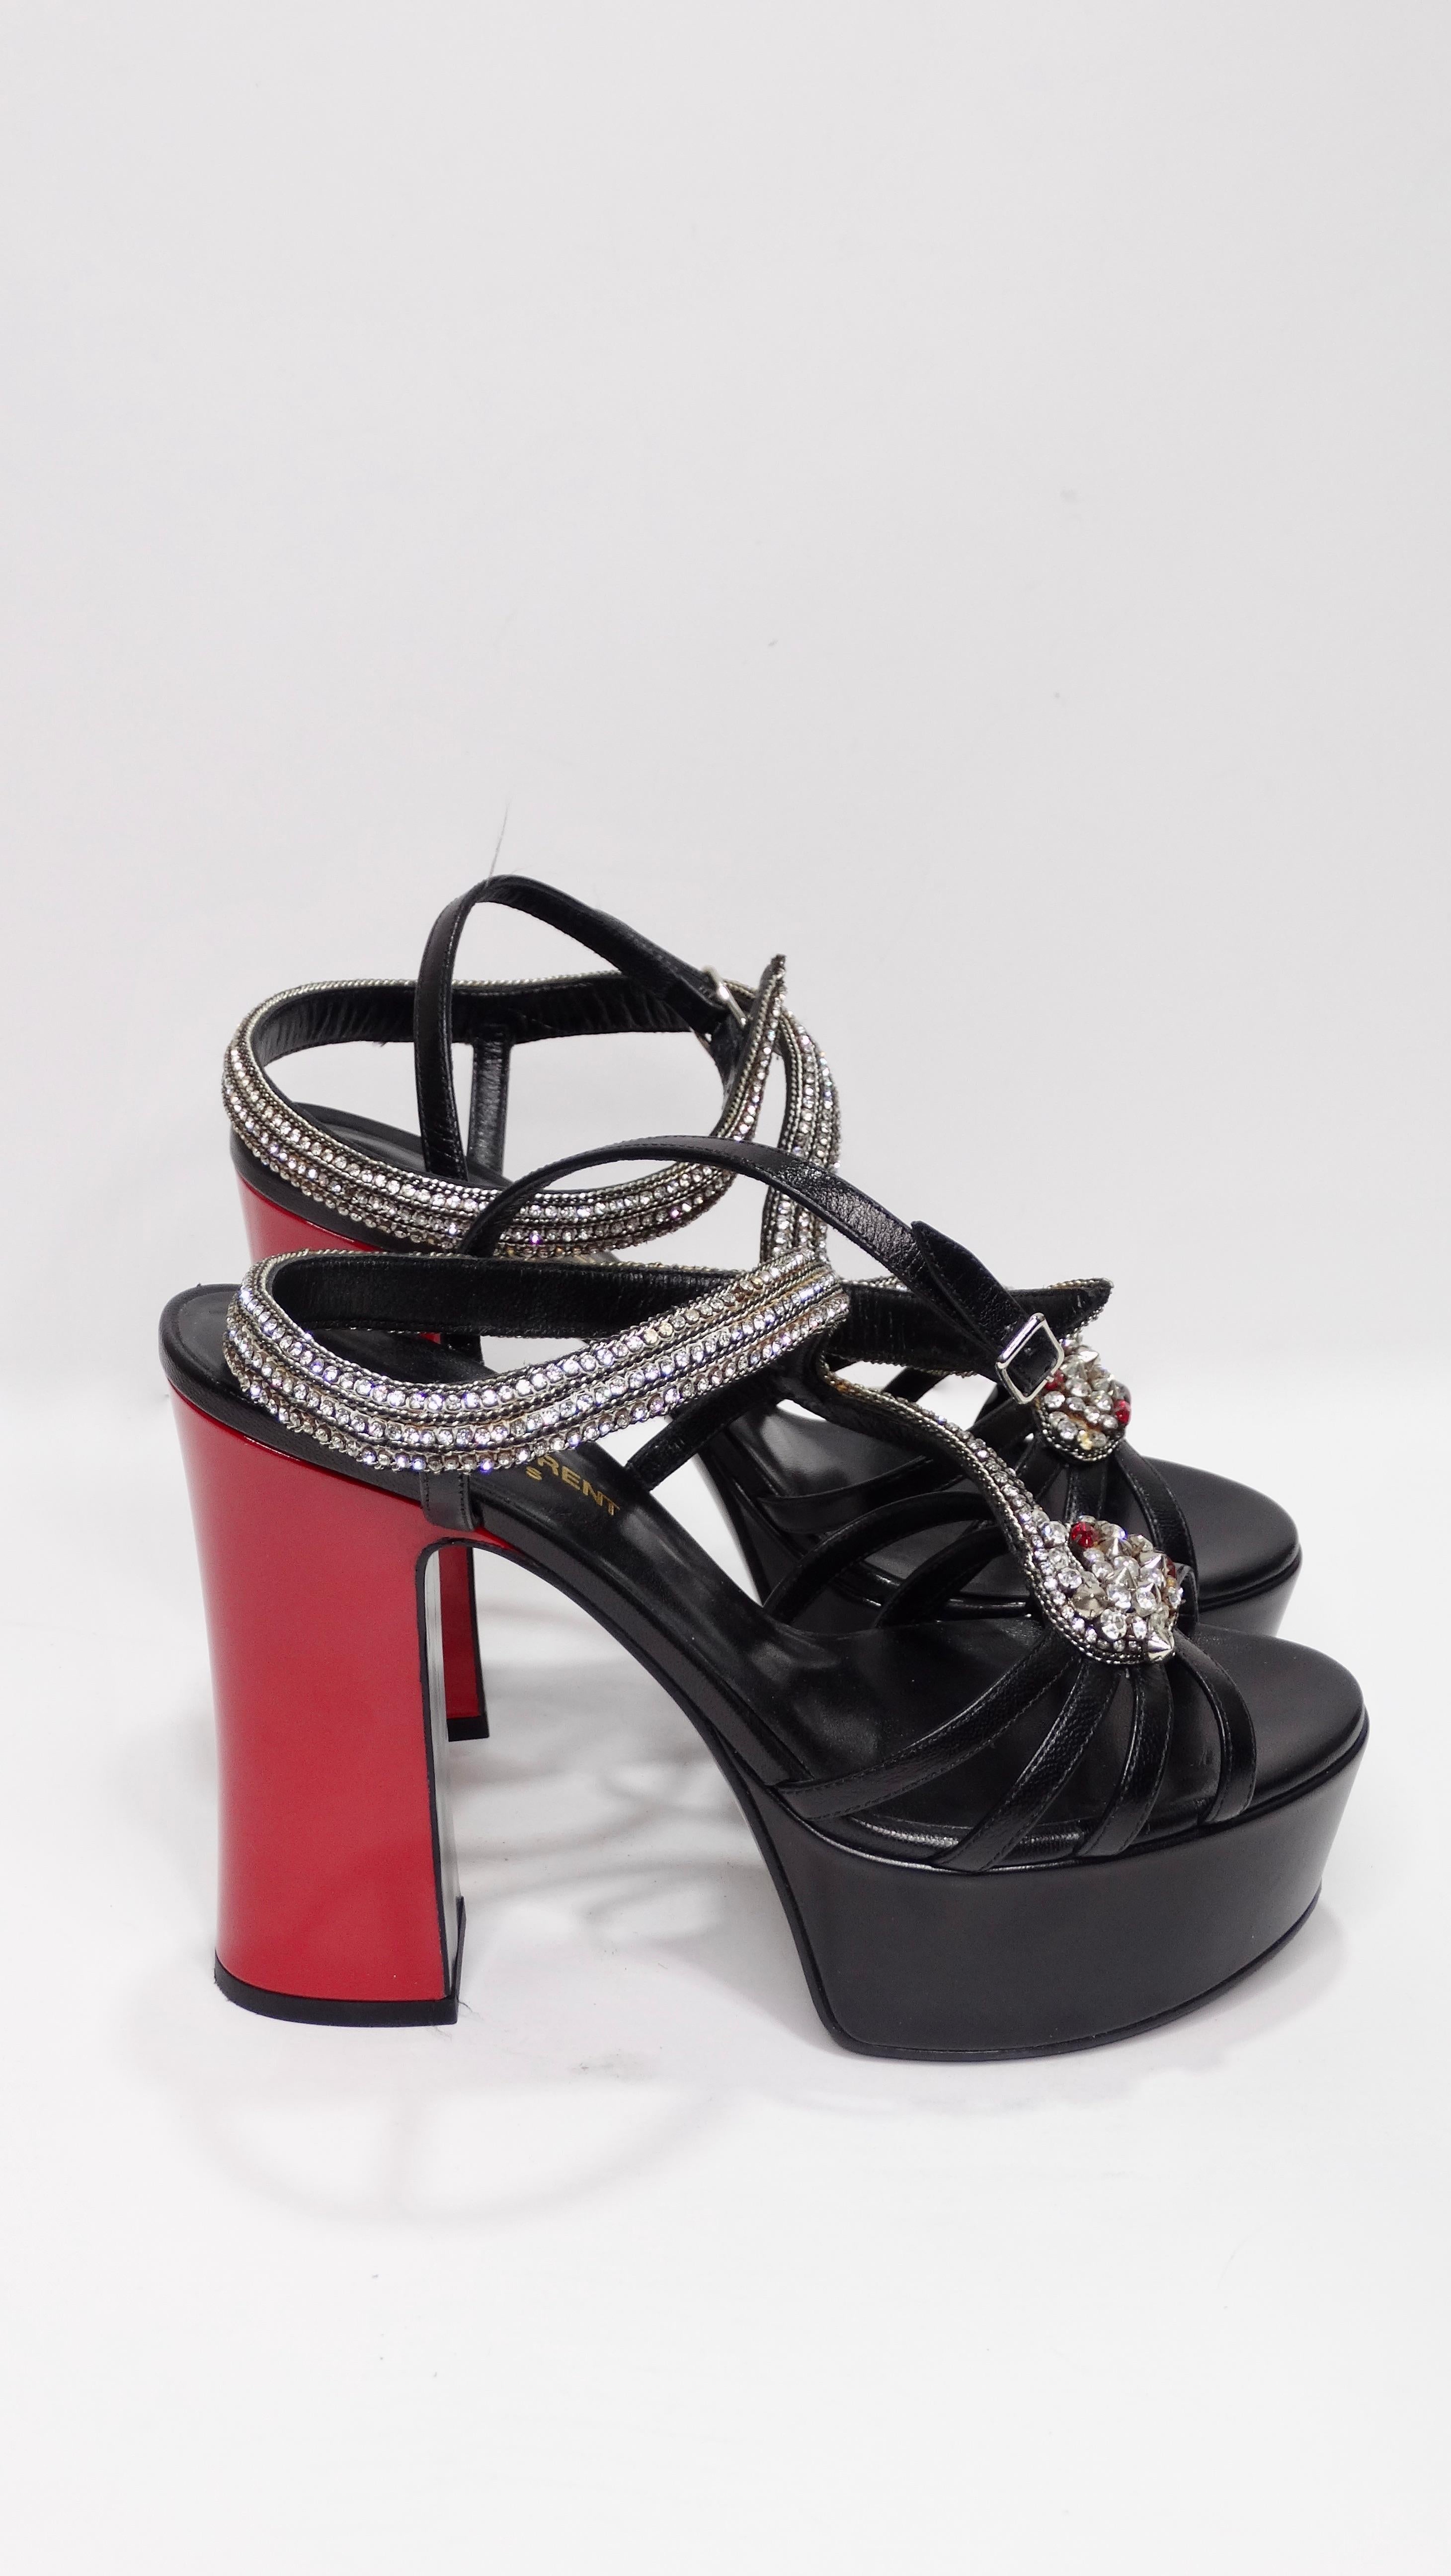 Add these killer heels to your collection! Circa mid to recent 2000's, these hot platforms are sure to steal the show. Complete with embellished crystal snakes with red eyes, crystal and black leather straps, and a red heel these stunning heels will